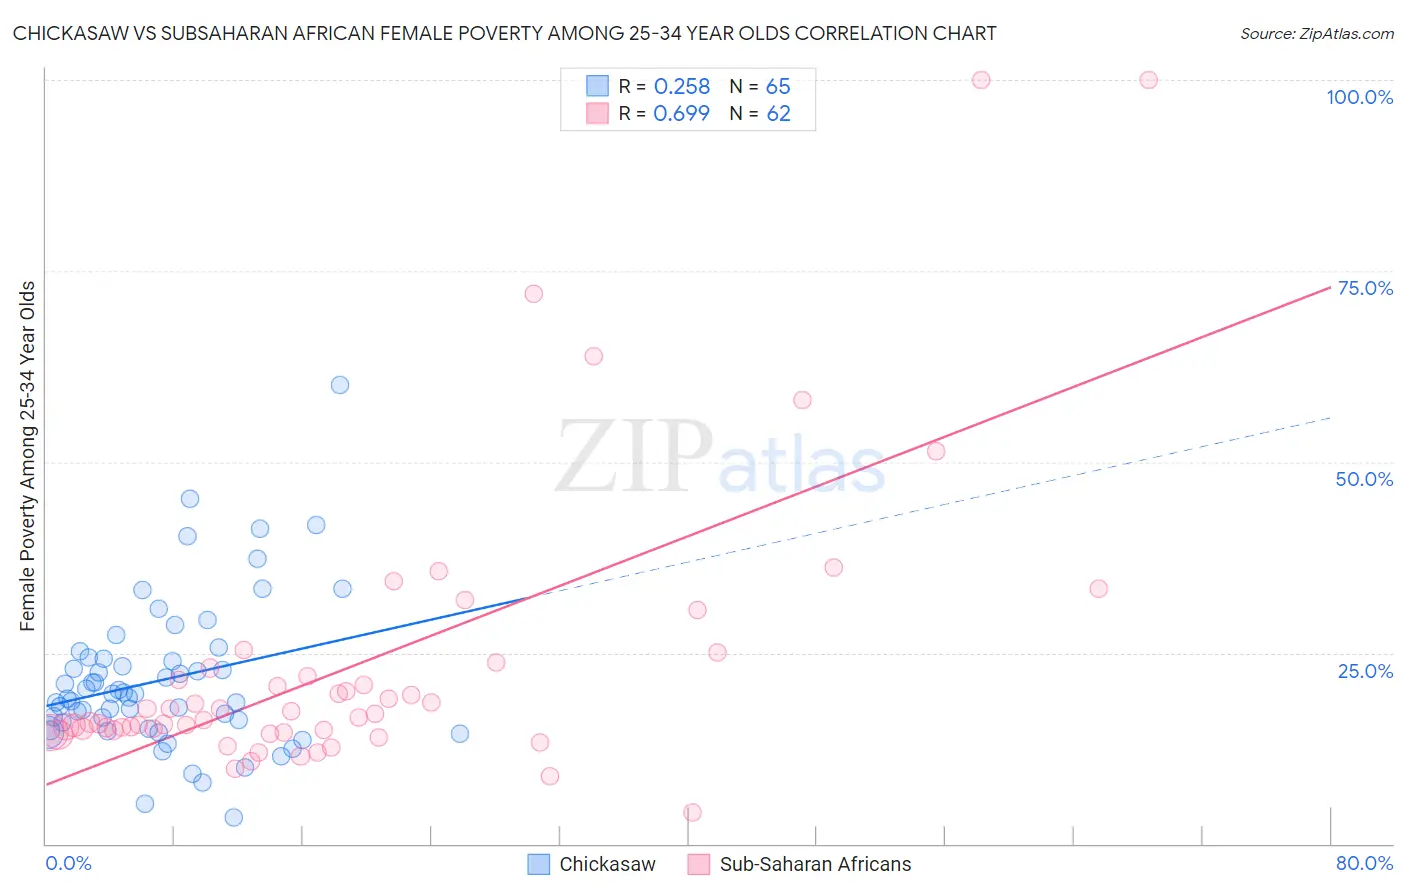 Chickasaw vs Subsaharan African Female Poverty Among 25-34 Year Olds